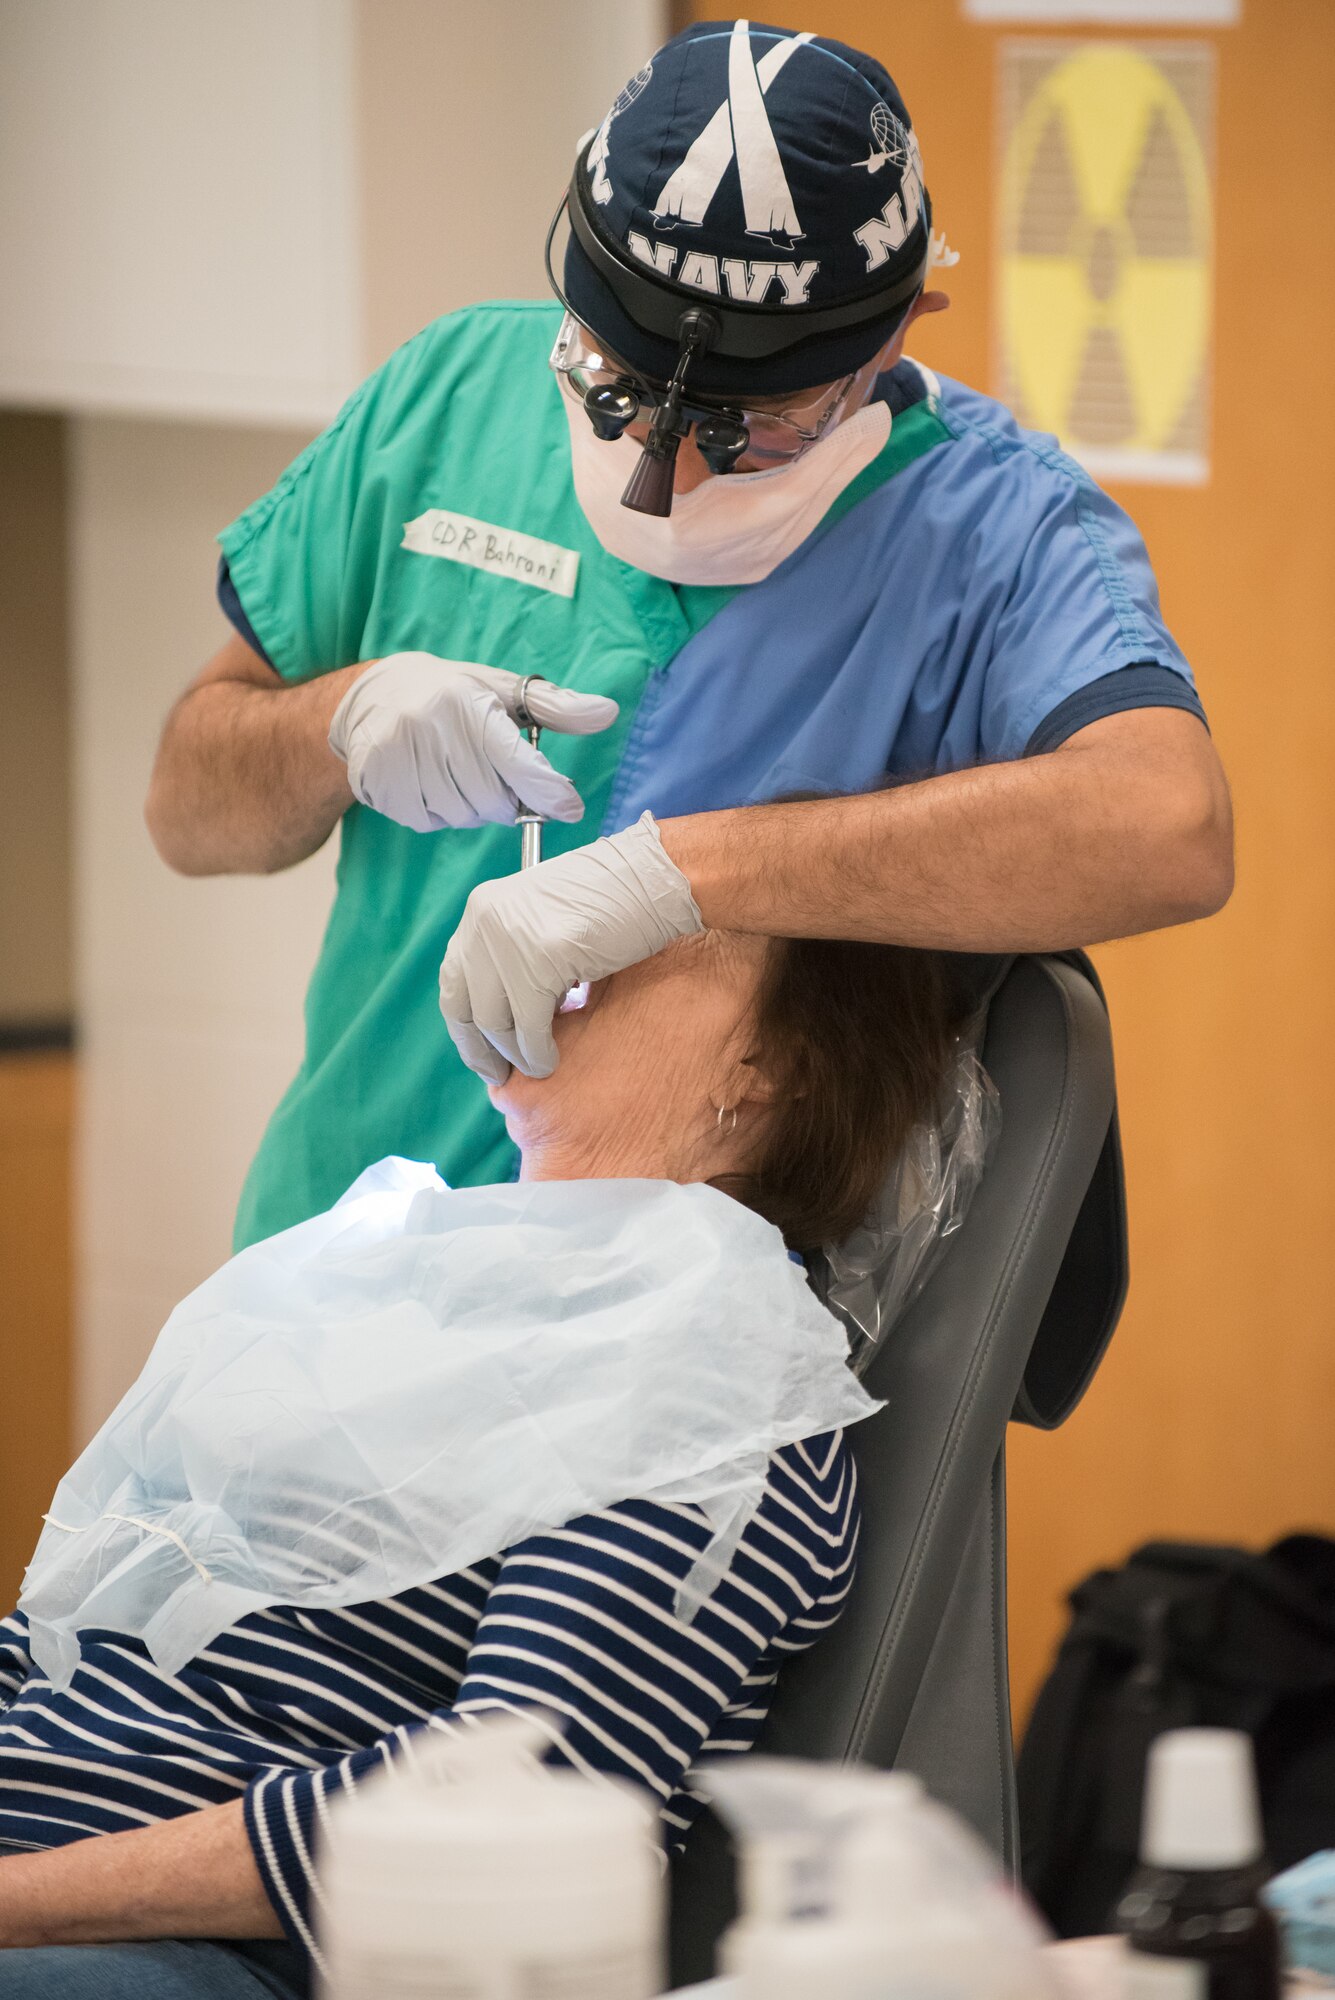 U.S. Navy Cmdr. Hayder Bahrani, a dentist from Expeditionary Medical Facility Great Lakes in Illinois, prepares a patient for a tooth extraction at a health-care clinic being operated by the Air Guard and U.S. Navy Reserve at Breathitt County High School in Jackson, Ky., June 20, 2018. The Jackson clinic is one of four that comprised Operation Bobcat, a 10-day mission to provide military medical troops with crucial training in field operations and logistics while offering no-cost health care to the residents of Eastern Kentucky. The clinics, which operated from June 15-24, offered non-emergent medical care; sports physicals; dental cleanings, fillings and extractions; eye exams and no-cost prescription eye glasses. (U.S. Air National Guard photo by Lt. Col. Dale Greer)